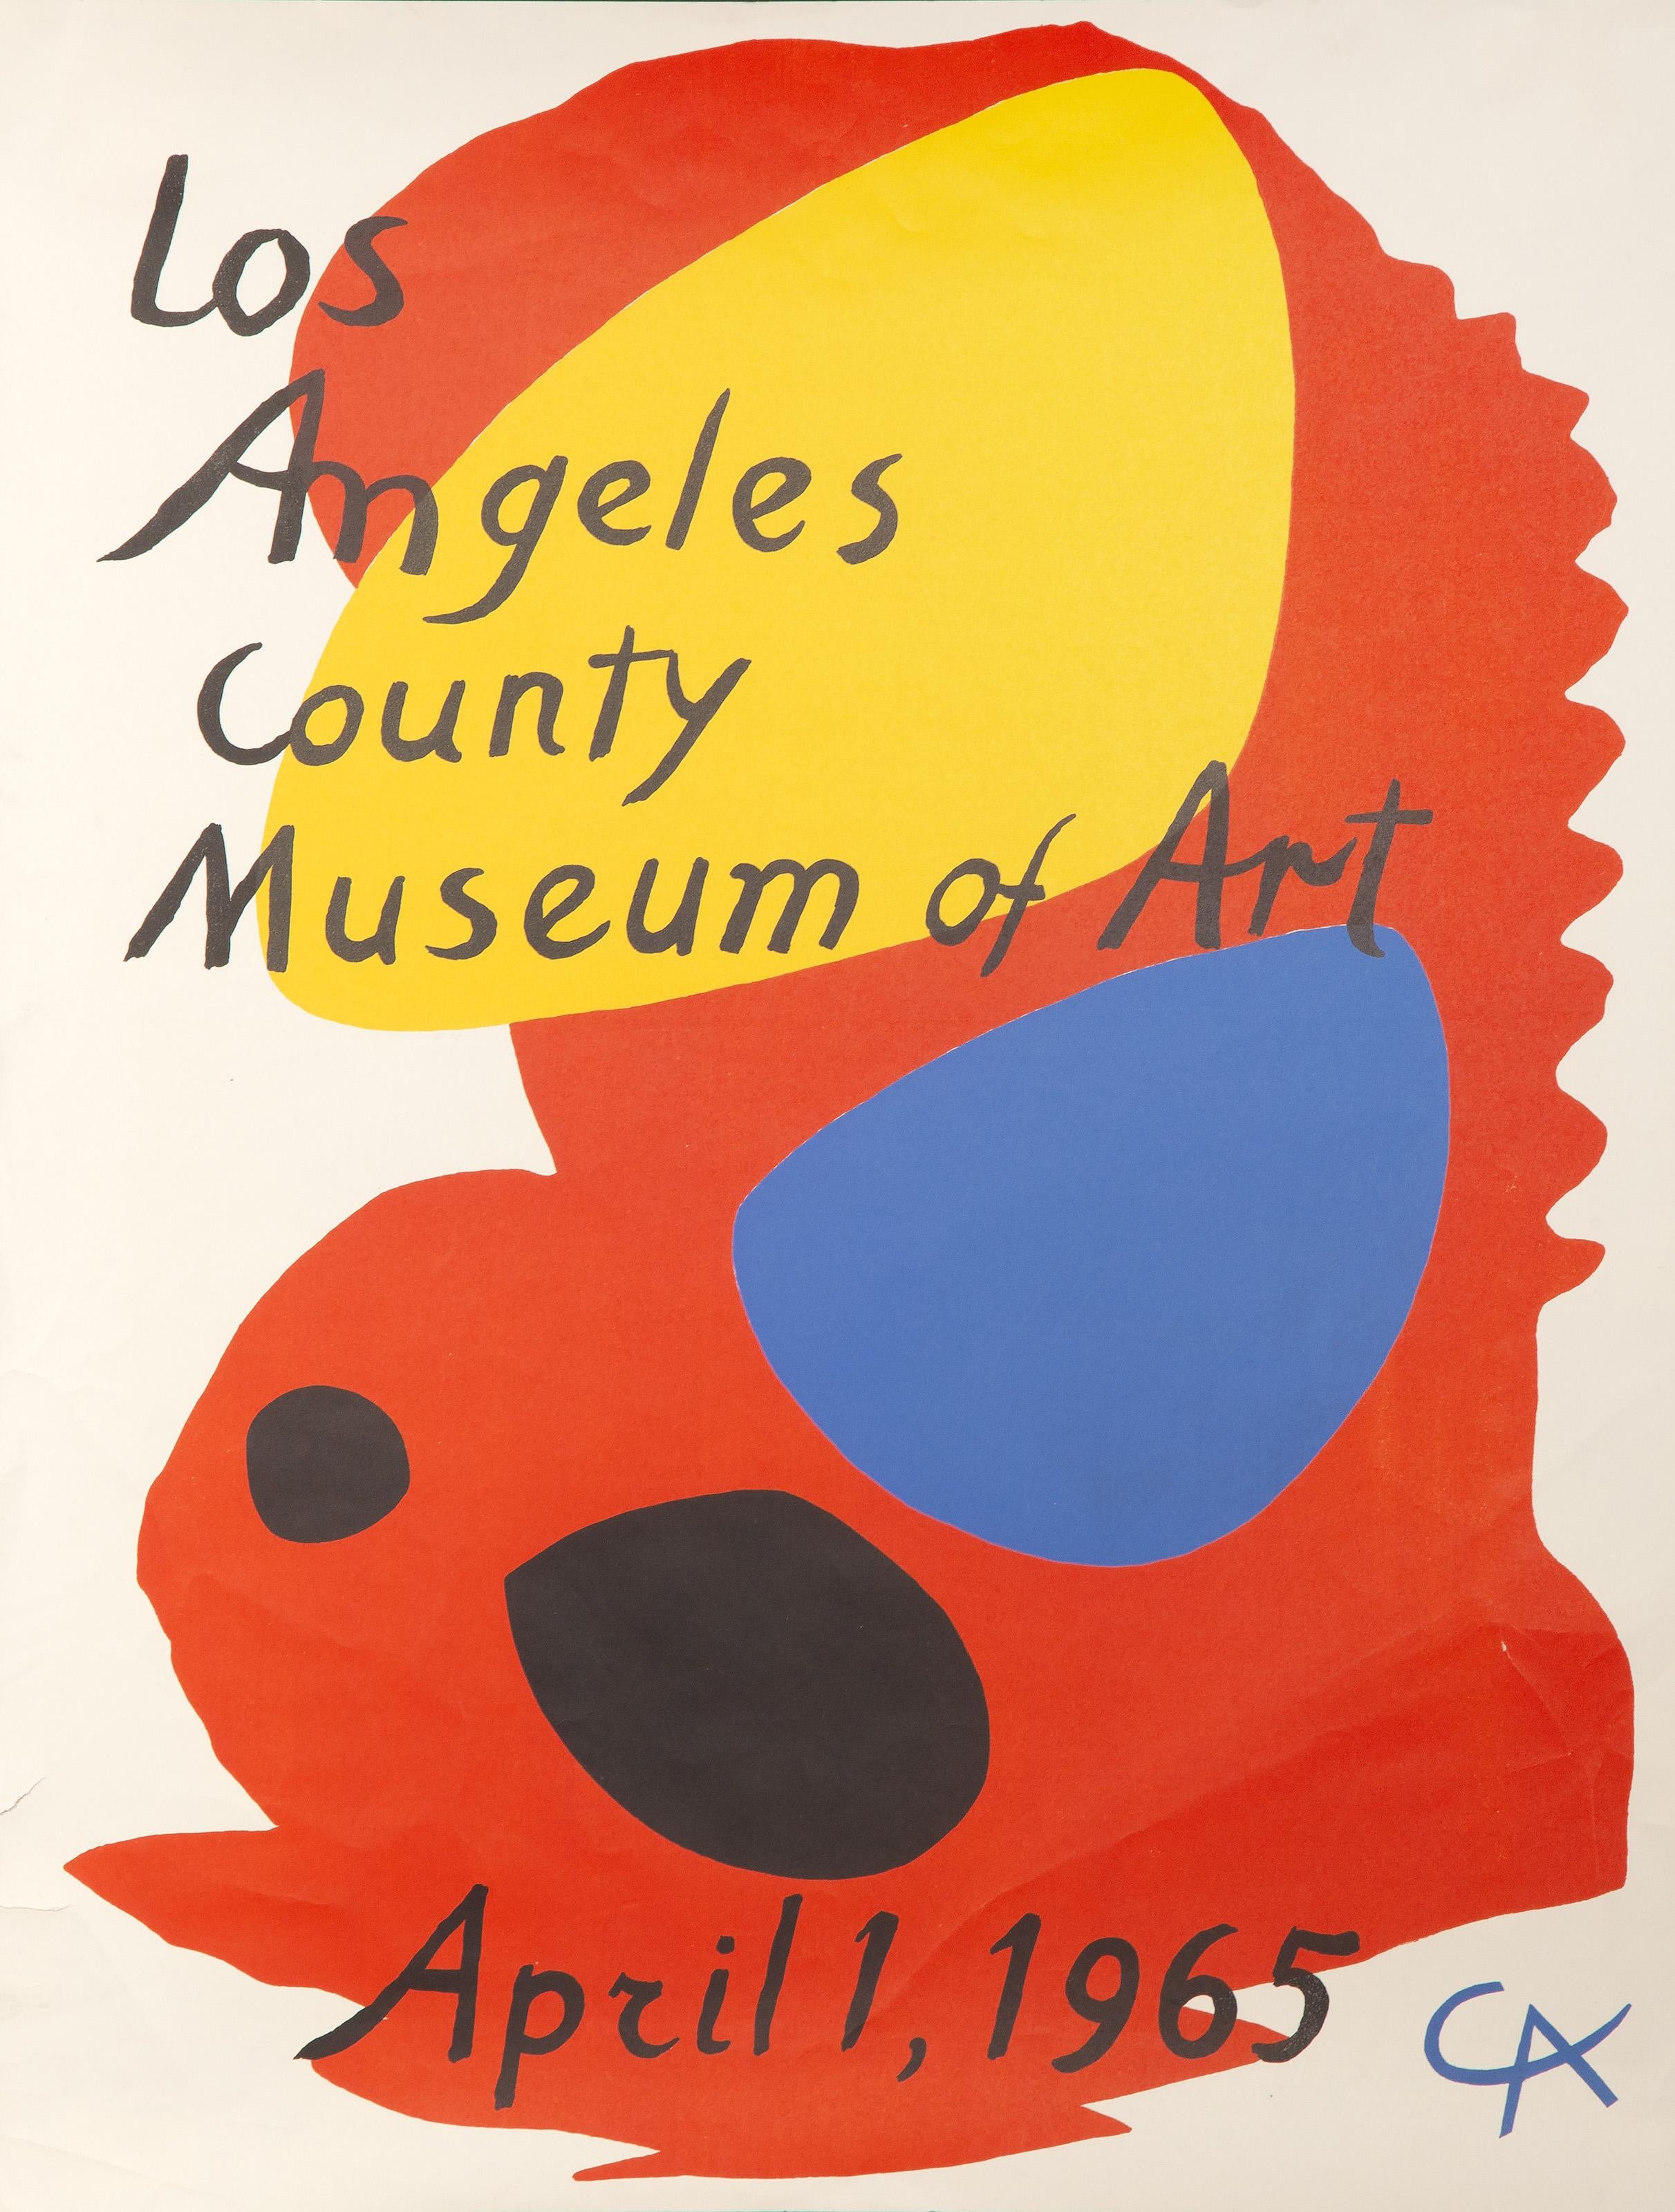 A lithograph poster by Alexander Calder for the Los Angeles County Museum of Art (LACMA), created in 1965. The dynamic composition is signed and dated in the plate.

Exhibition Poster: Los Angeles County Museum of Art
Alexander Calder, American